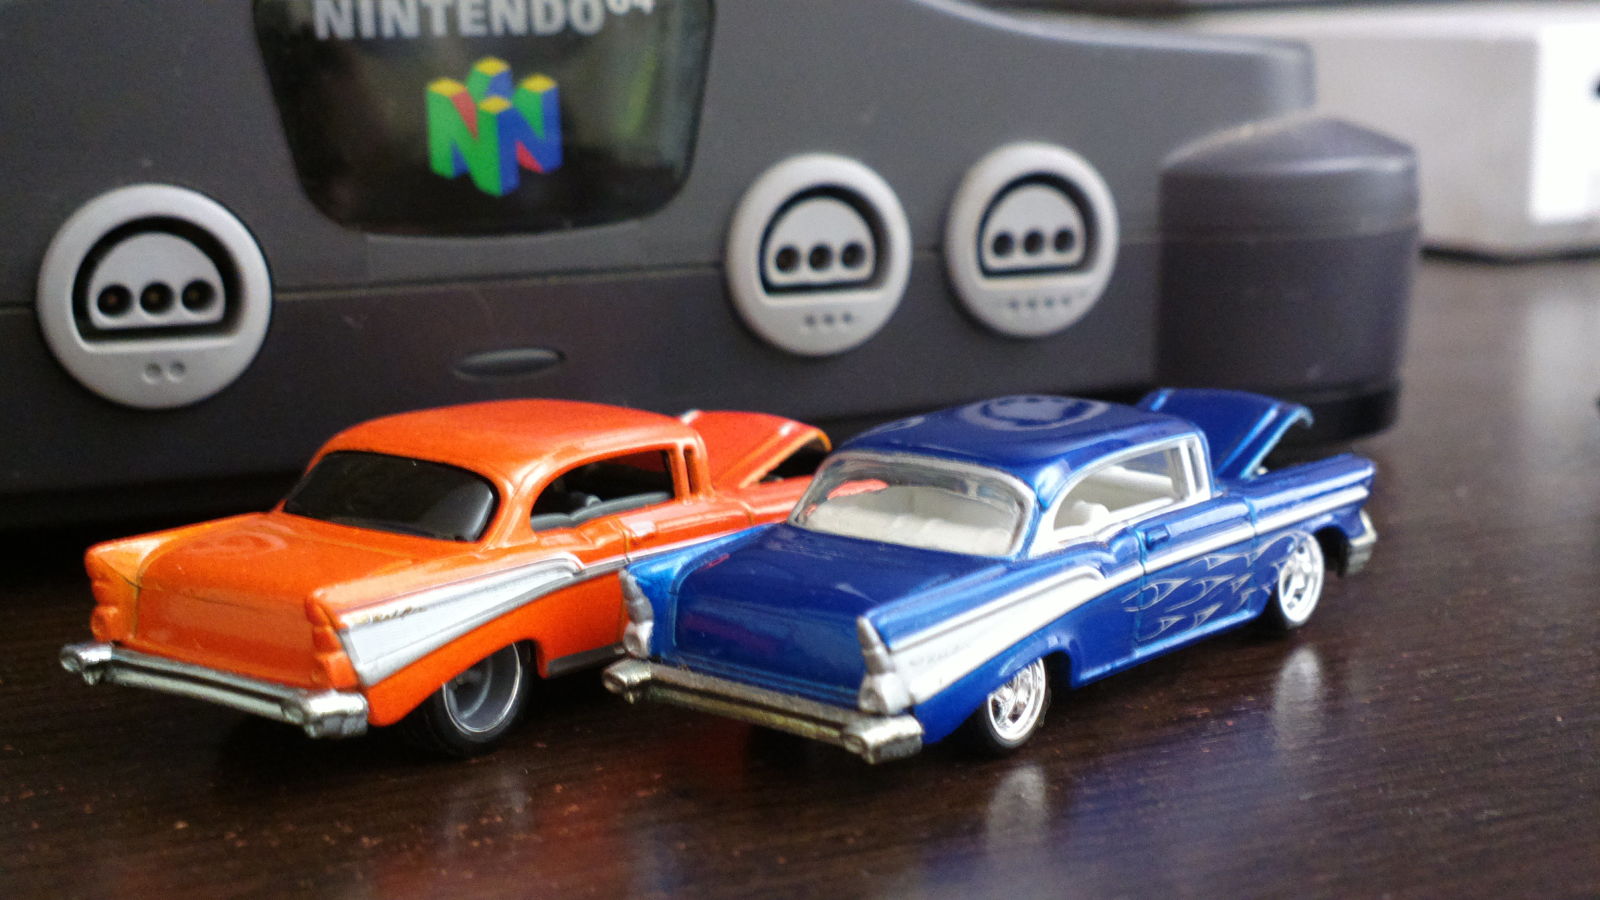 Illustration for article titled Three Chevys and a Nintendo 64